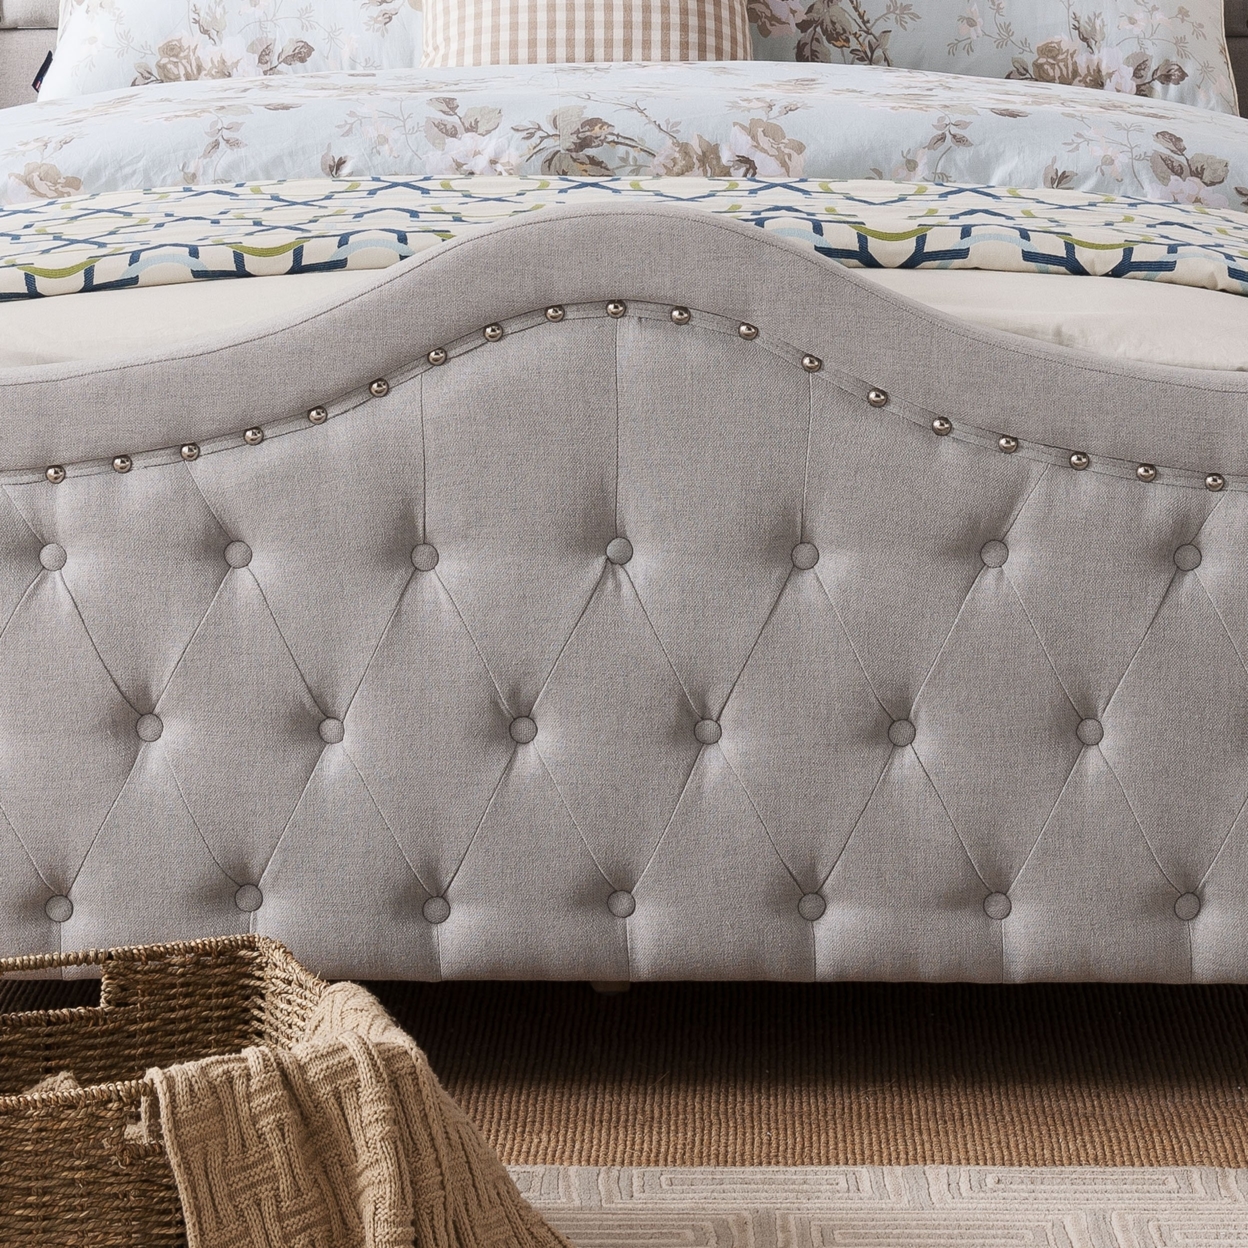 Livi Fabric Fully Upholstered Queen Bed Set - Ivory